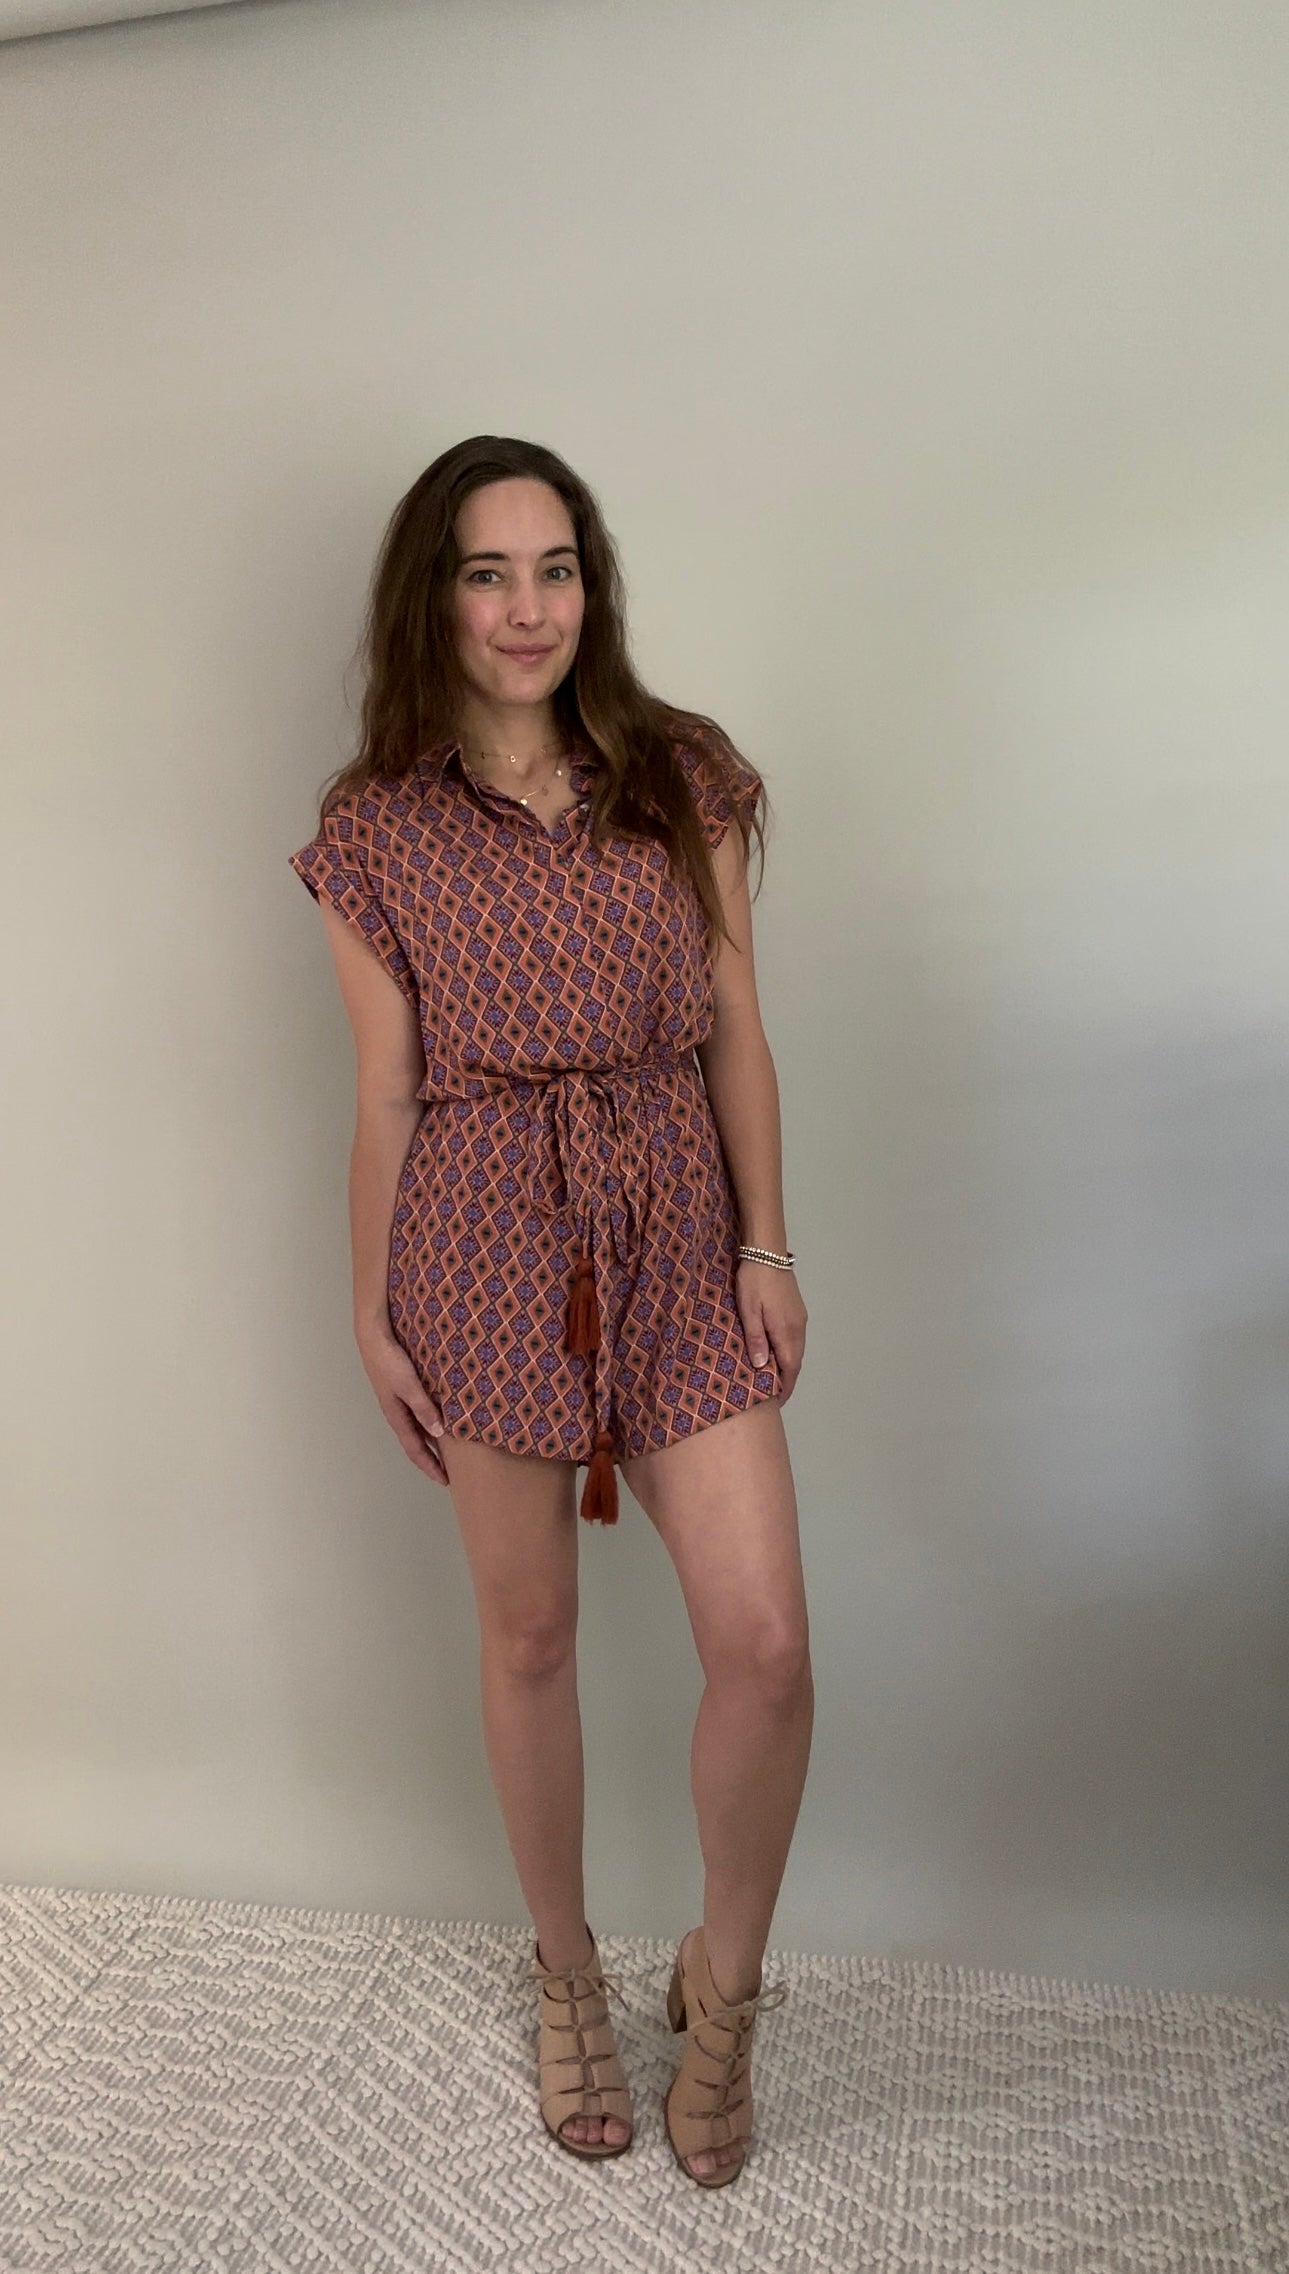 Make a statement with this romper! Beautiful print in fall tones with so many details that set this romper apart. Tassel belt, POCKETS, cuff sleeve, hidden chest button closure. Wear it belted or unbelted. This is a must for sure!